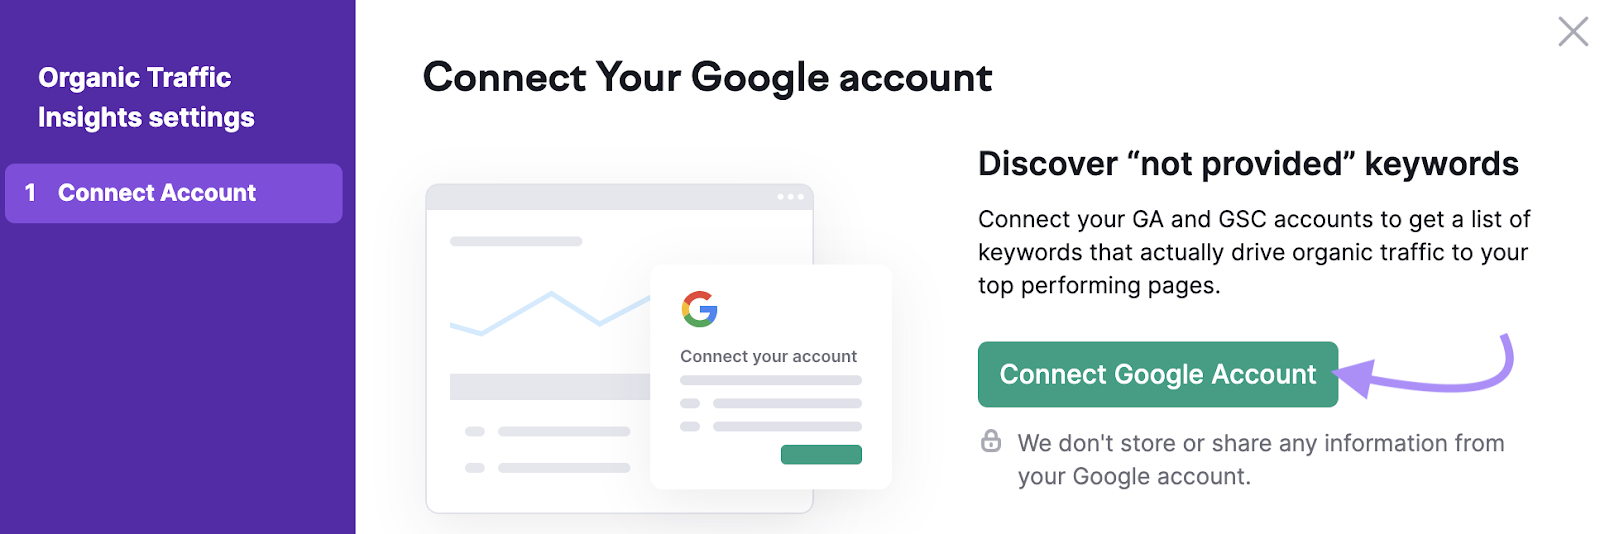 "Connect your Google account" window in Organic Traffic Insights settings